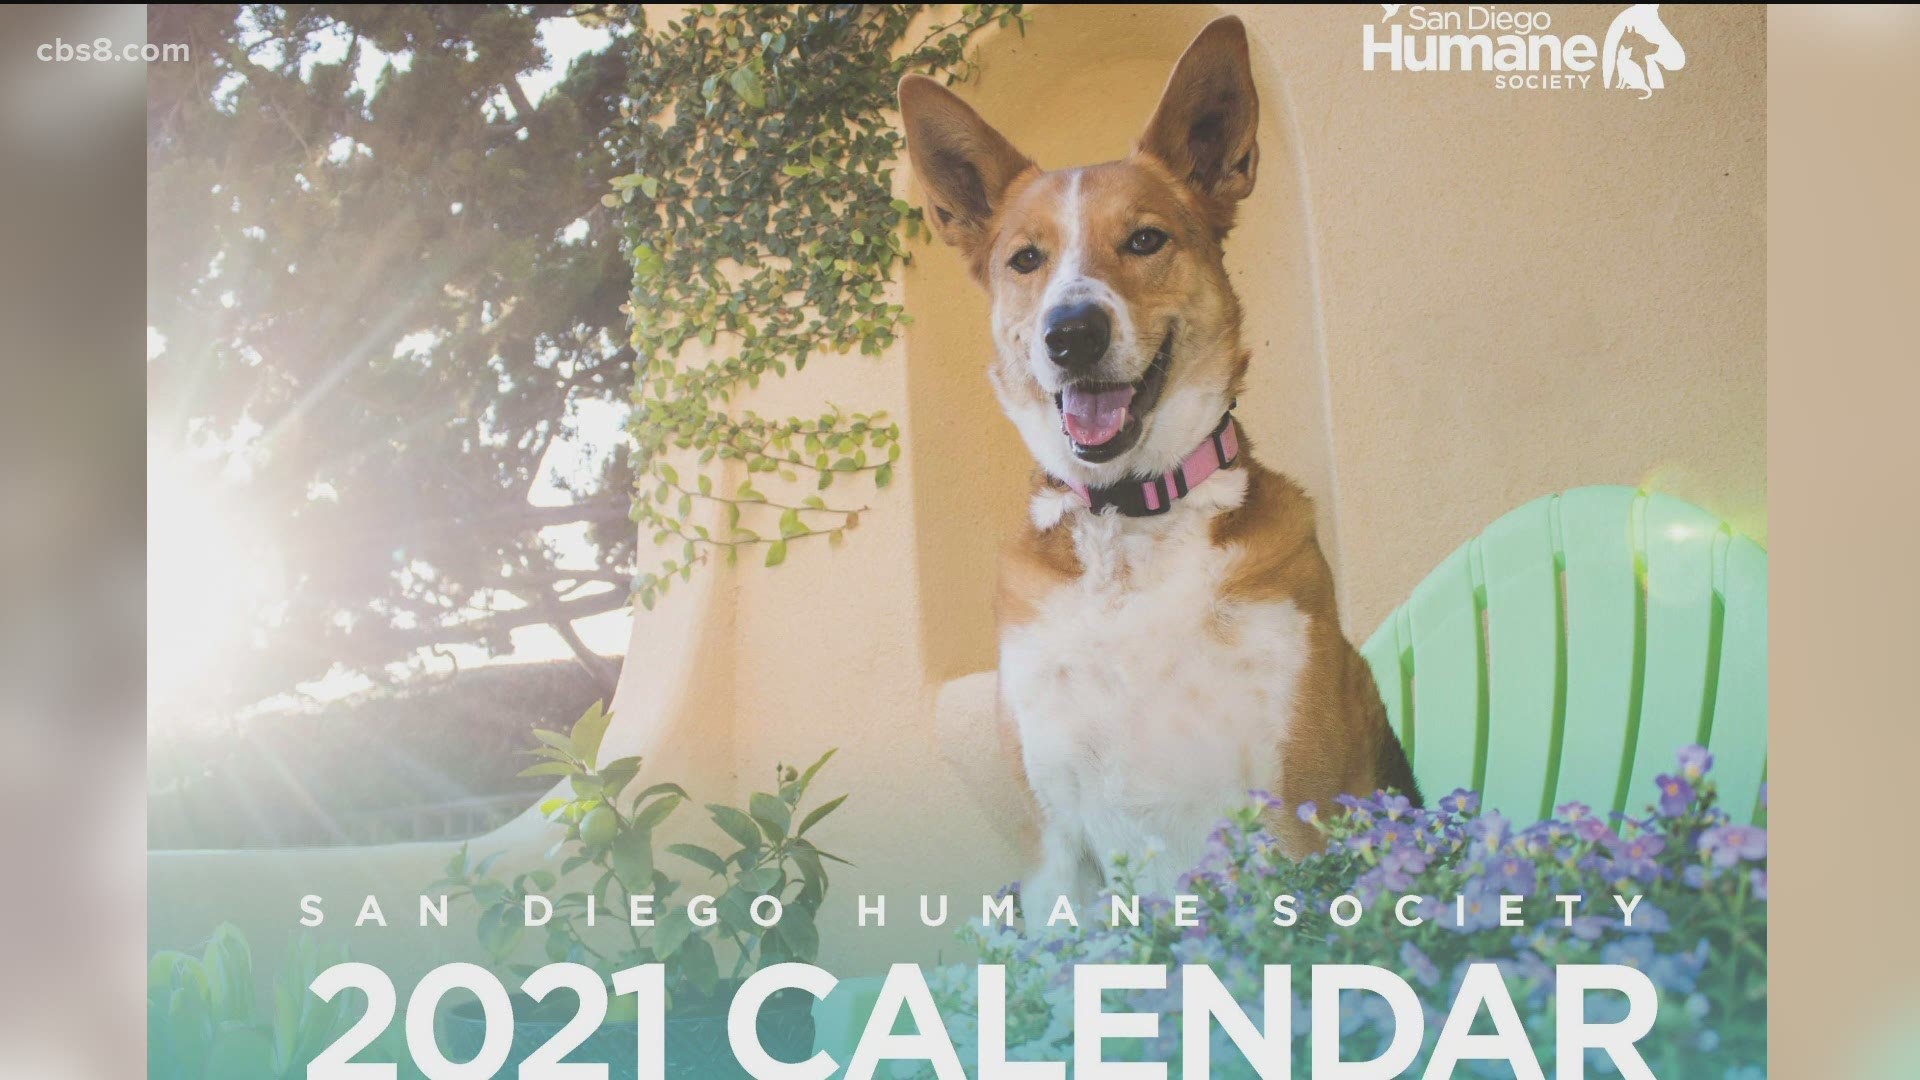 Nina Thompson, Jeffrey Hicken, Vicky and Rosco joined Morning Extra to talk about the calendar and how it helps animals in San Diego.